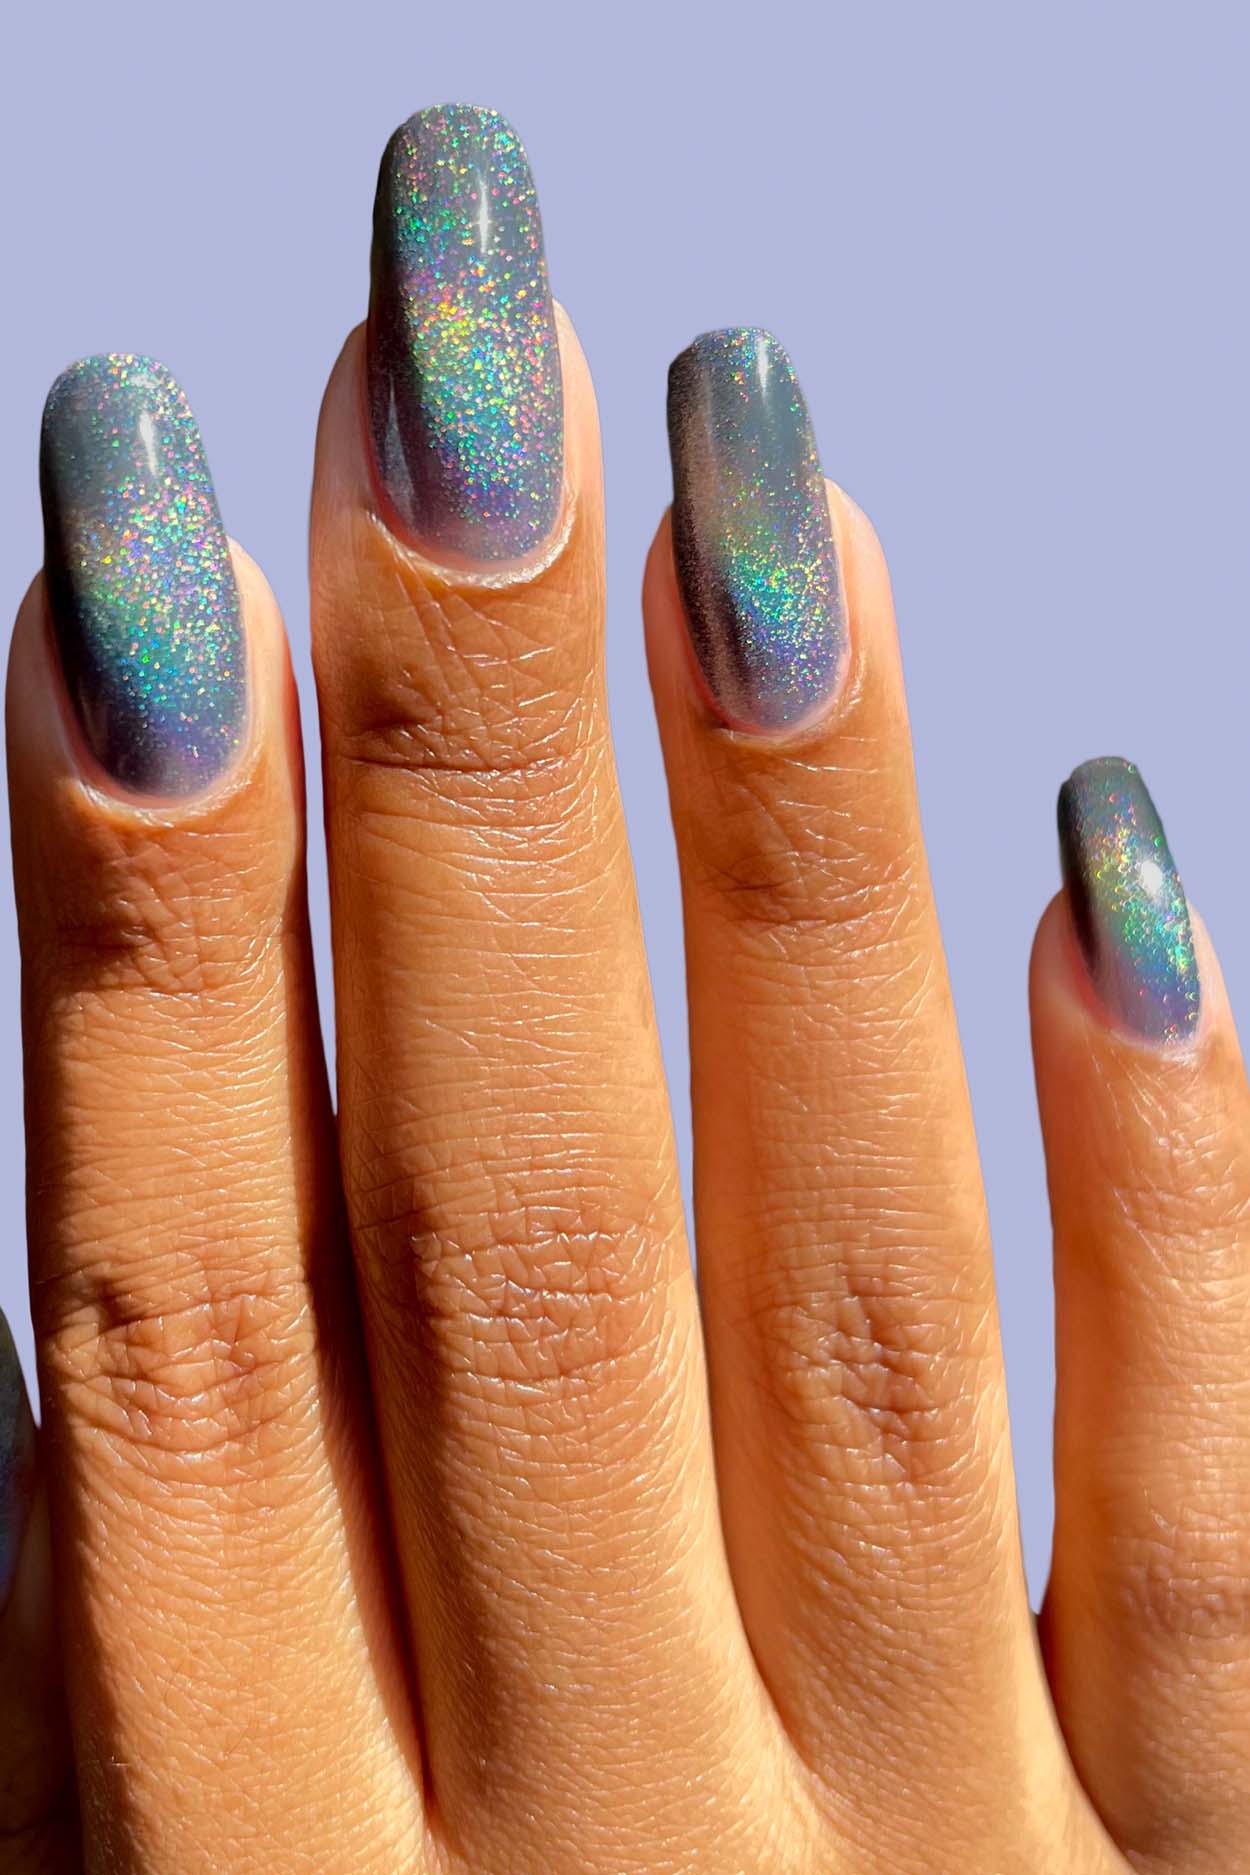 Perriewinkle Shimmergraphic™ Nail Polish - Cirque Colors Pixie Holo